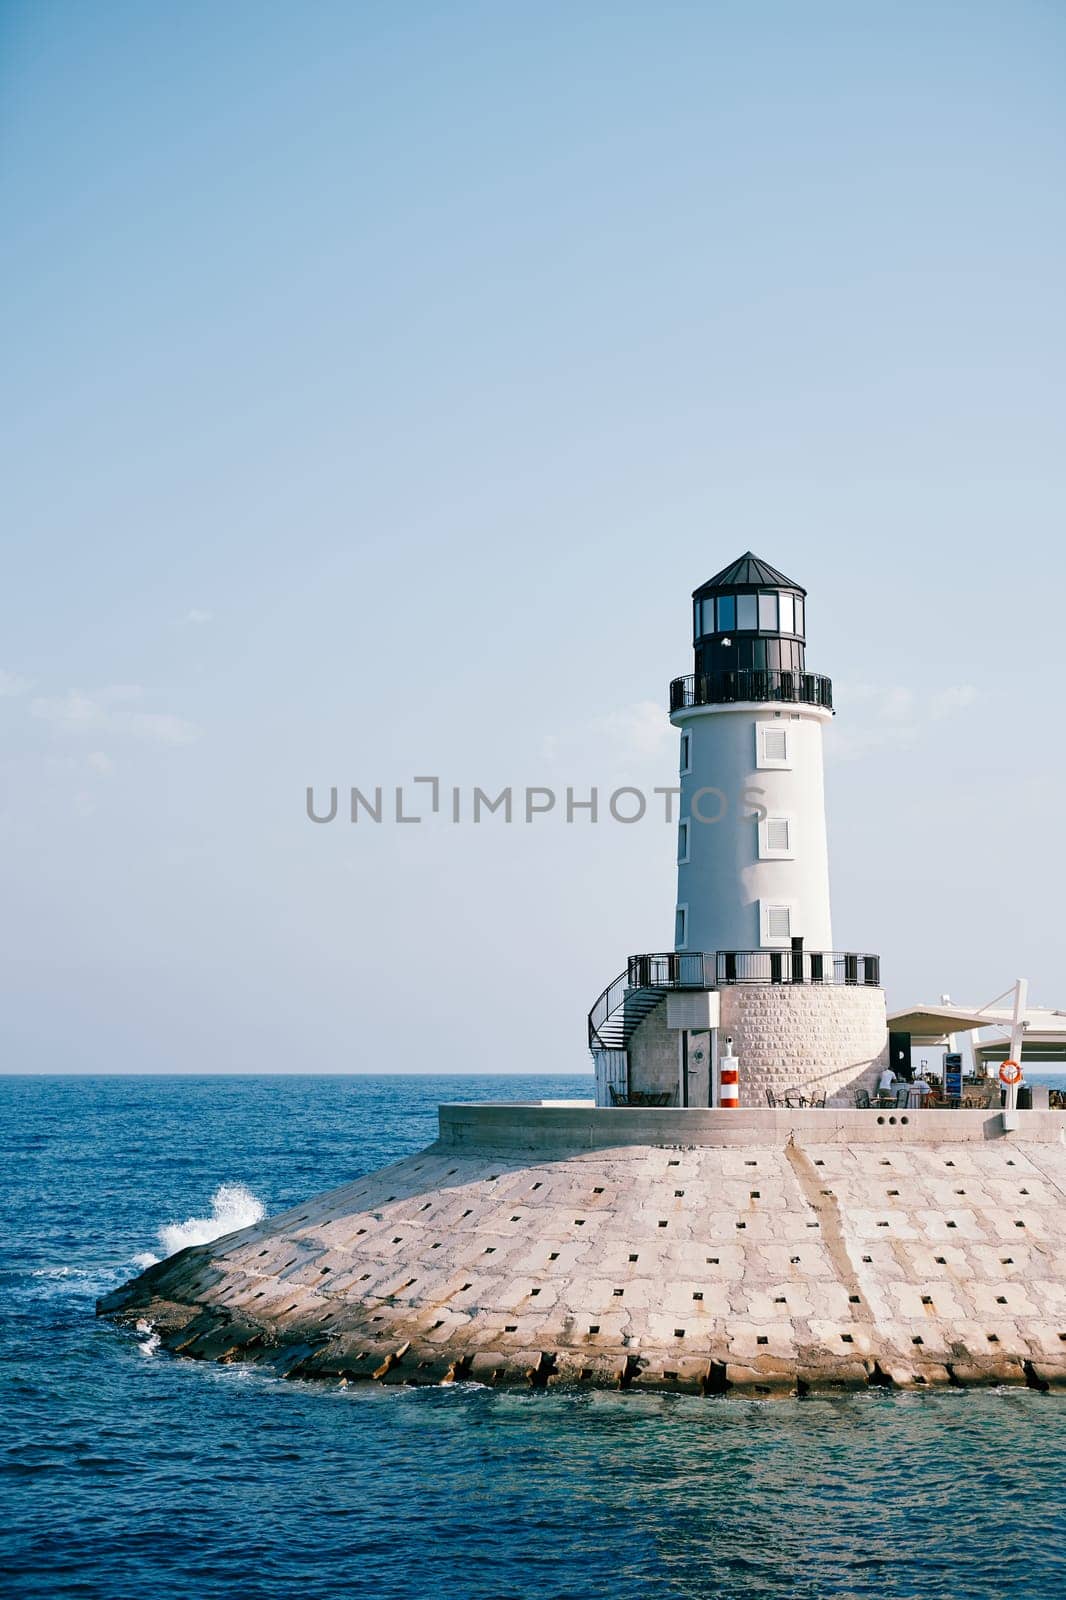 Lighthouse on the breakwater in Lustica Bay. Montenegro by Nadtochiy